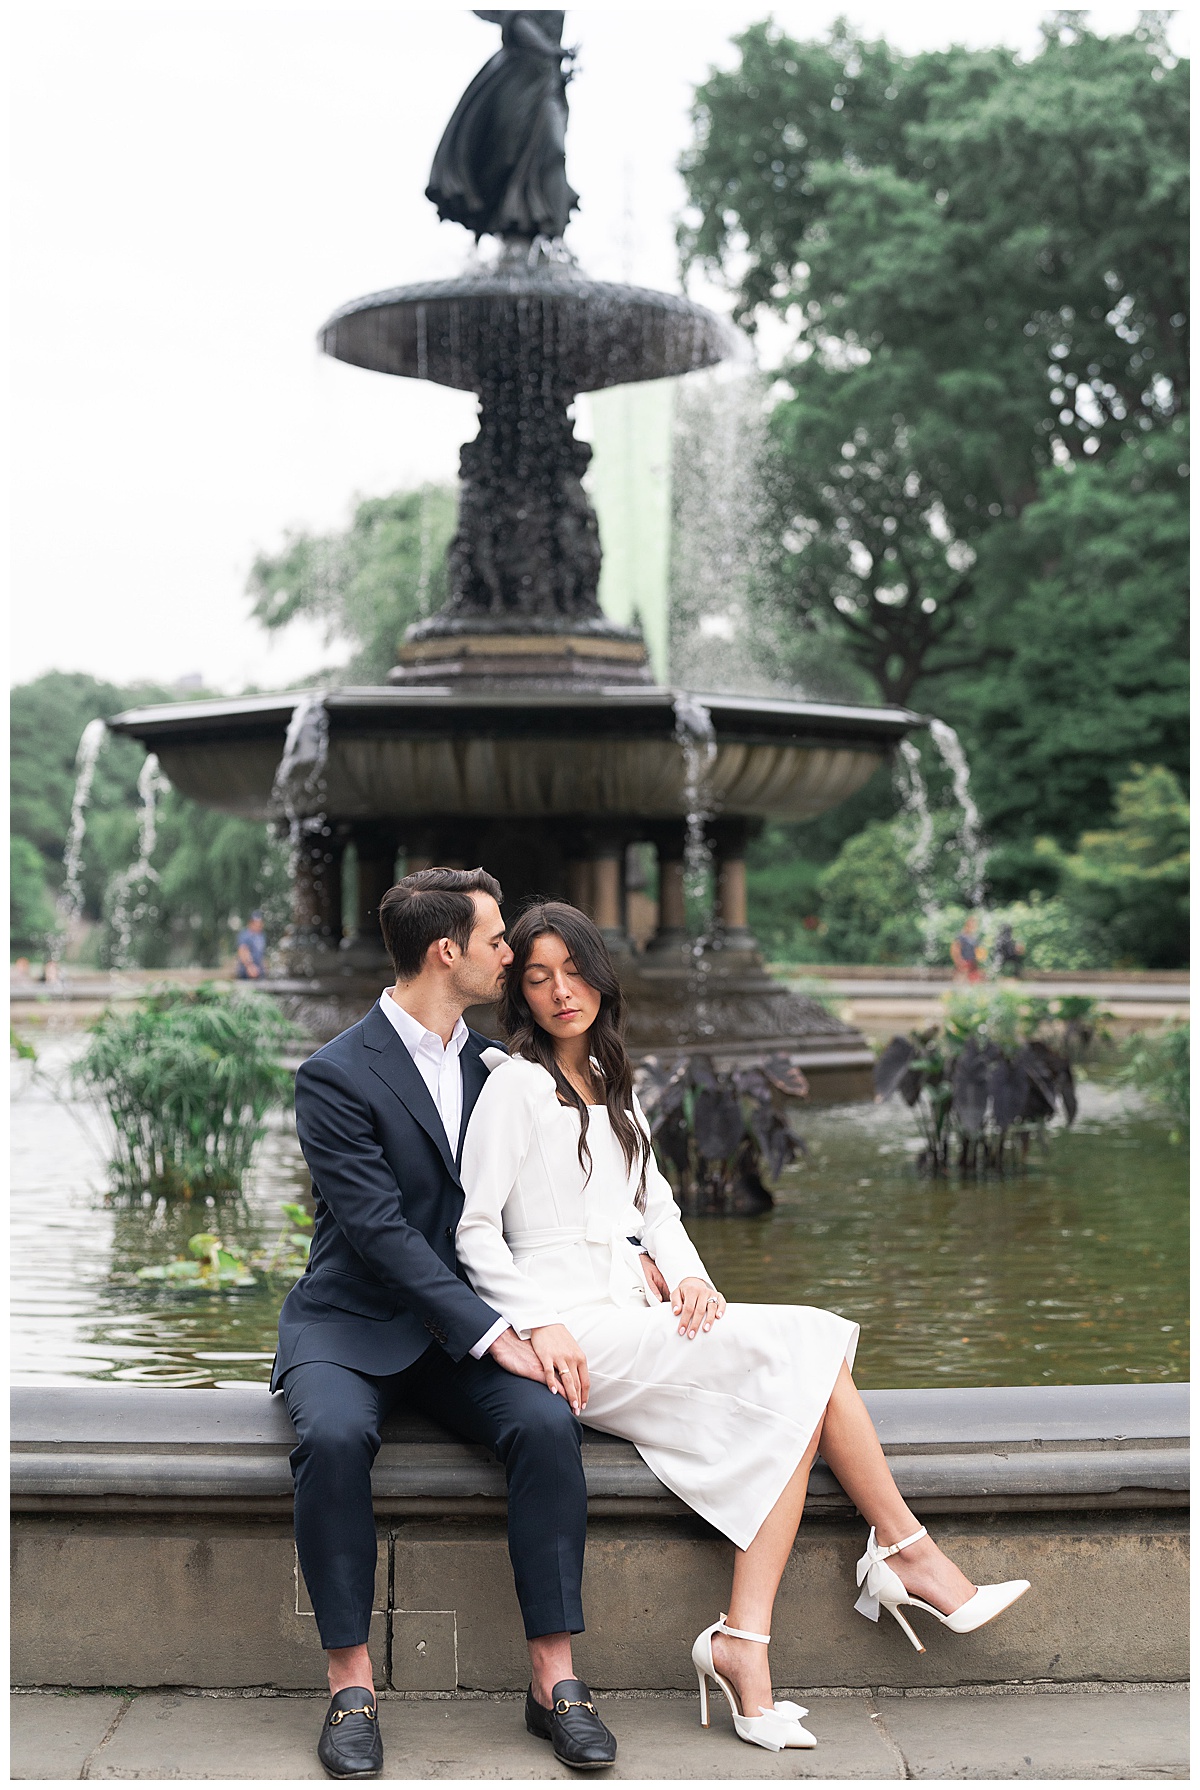 Man and woman sit together in Central Park for Houston’s Best Wedding Photographers